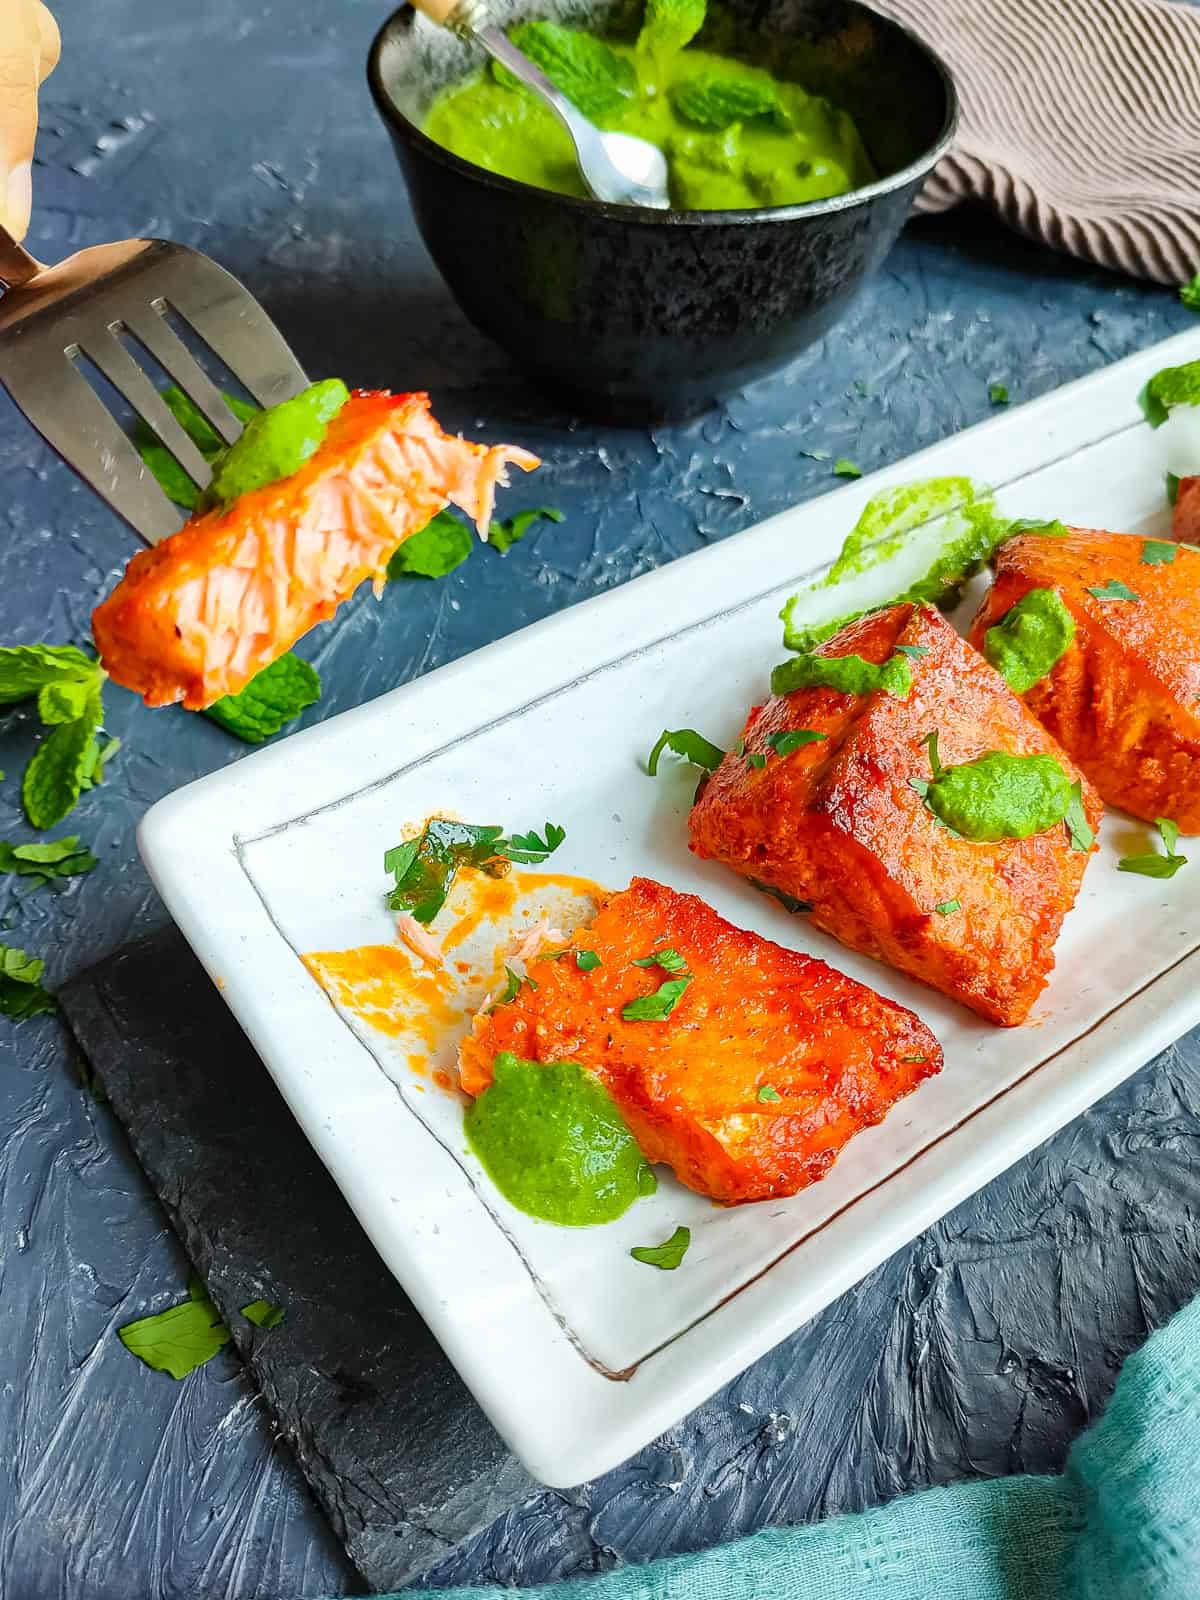 Salmon tandoori pieces with mint sauce and a fork with a piece of salmon.